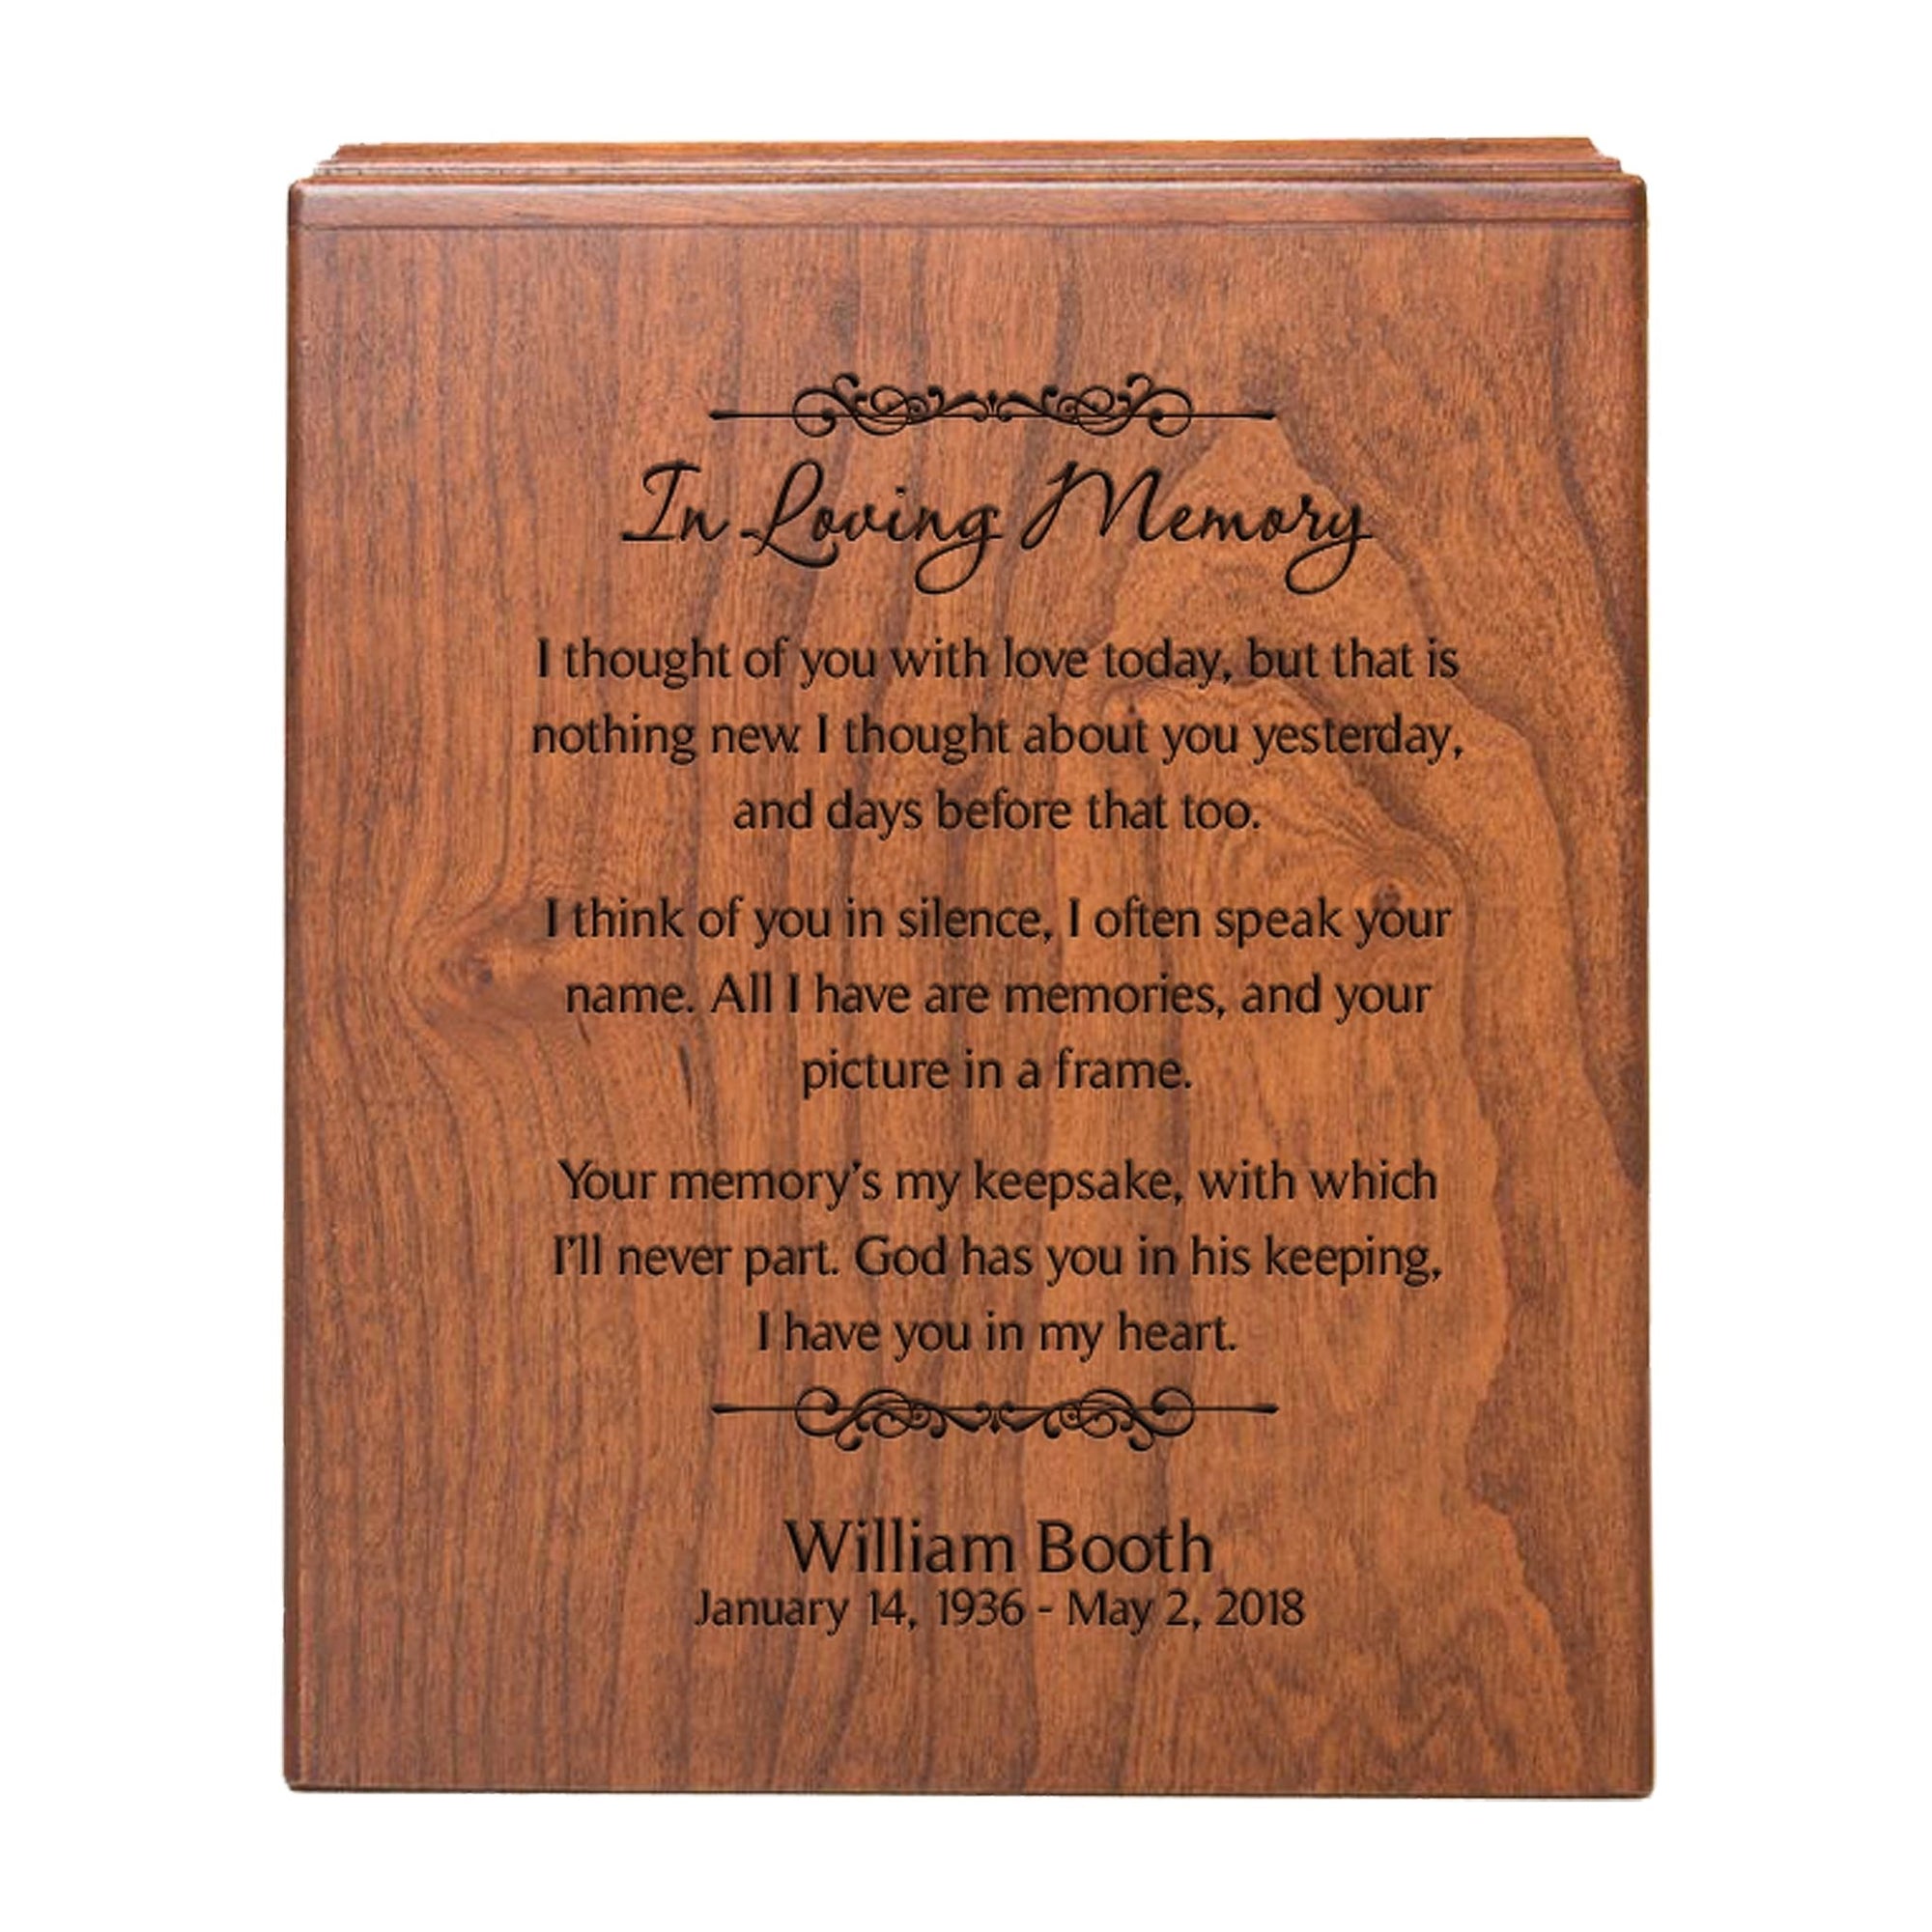 Custom Engraved Memorial Economy Keepsake Urn Box Holds 280 Cu Inches Of Human Ashes In Loving Memory - LifeSong Milestones